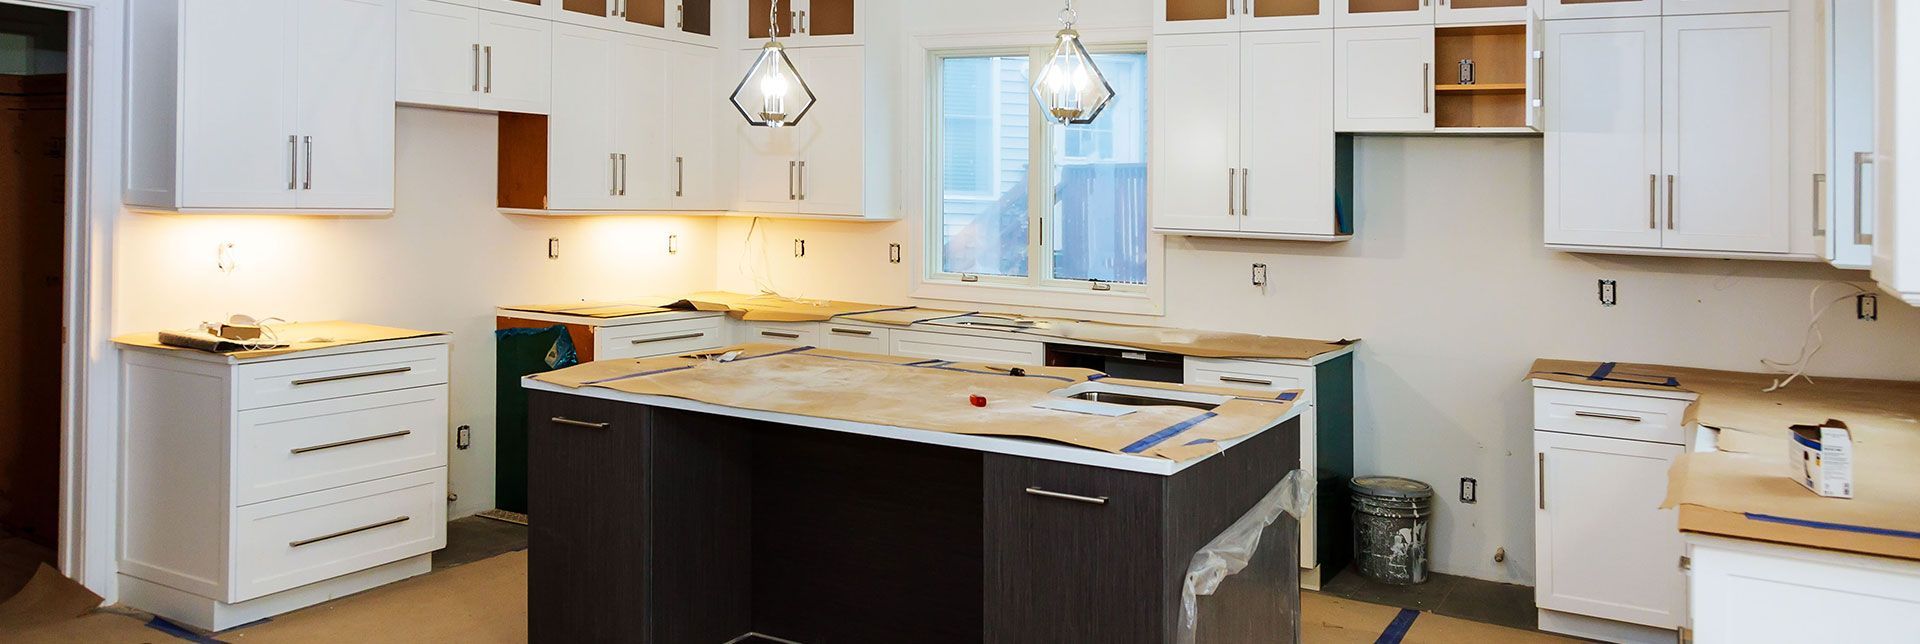 A kitchen under construction with white cabinets and a large island